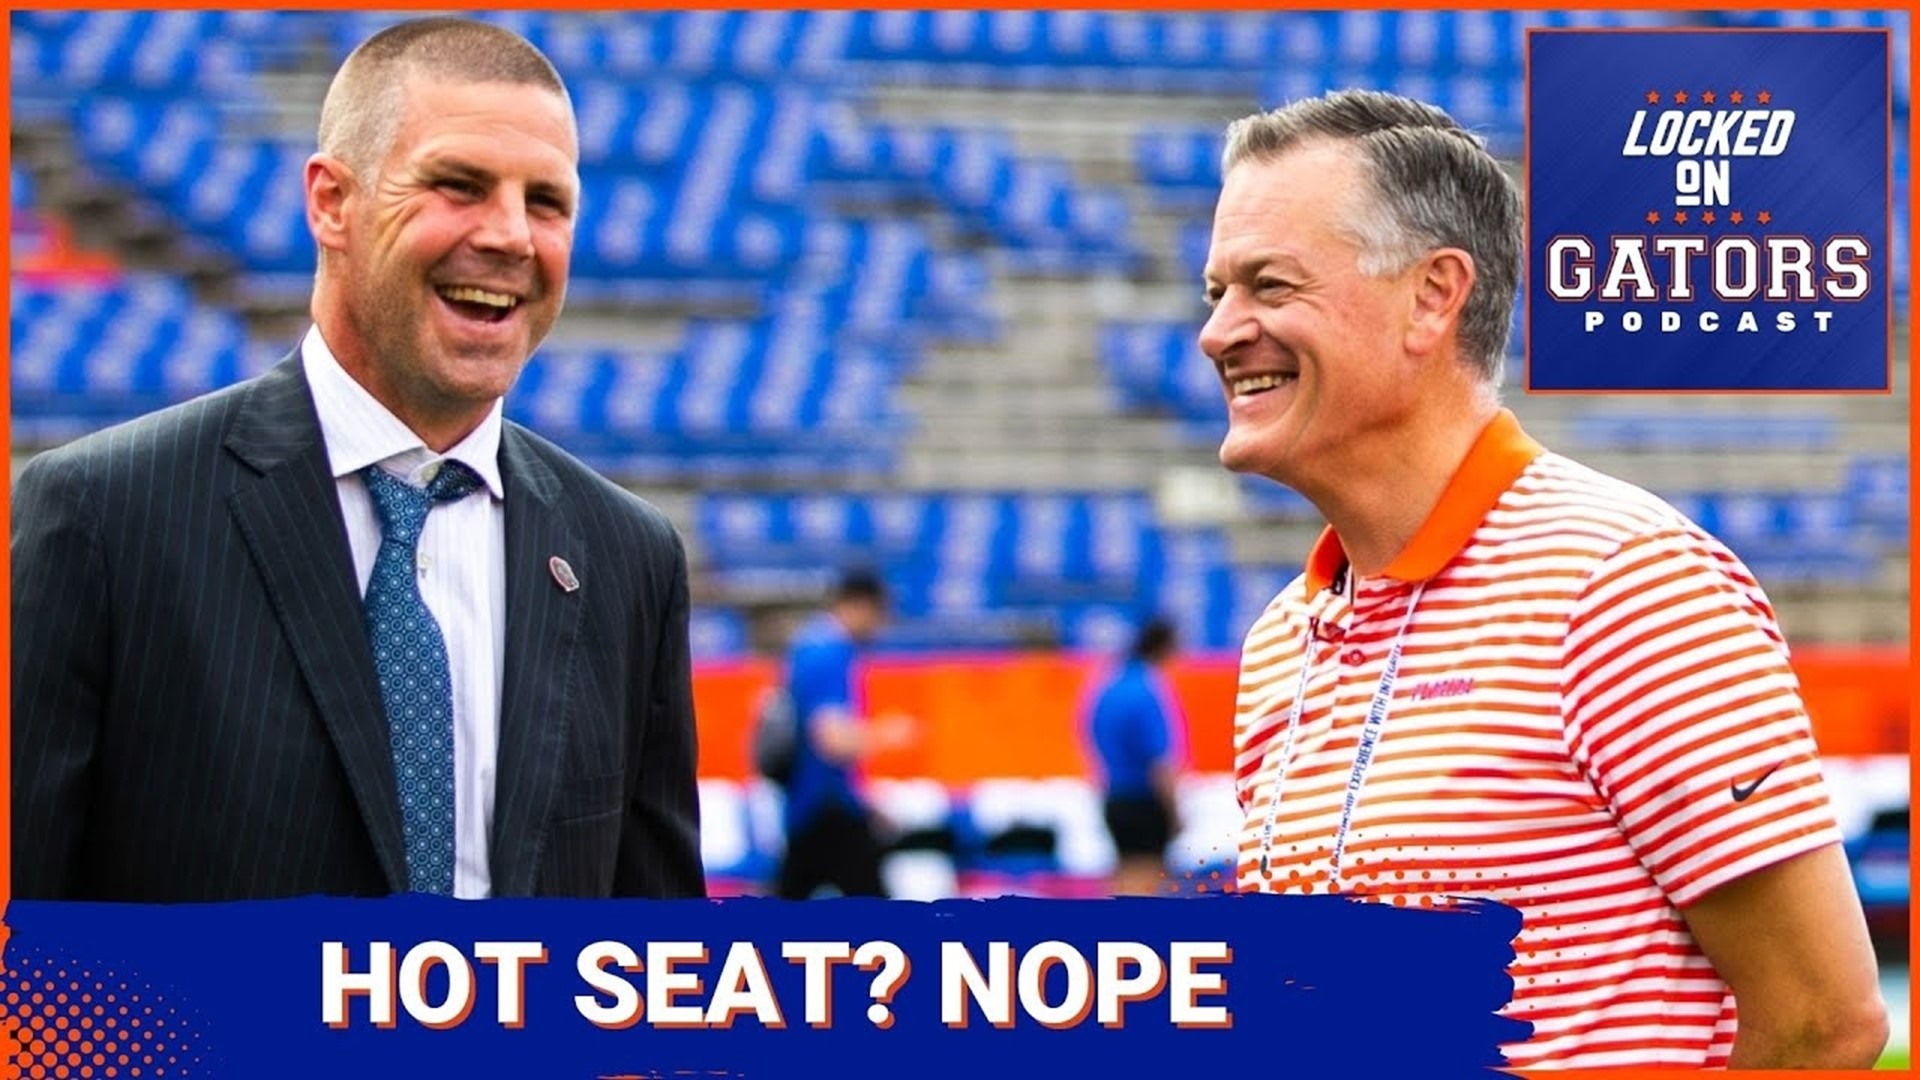 The Florida Gators football team under head coach Billy Napier had an up-and-down first season where they went 6-7, including a 30-3 loss to the Oregon State Beavers